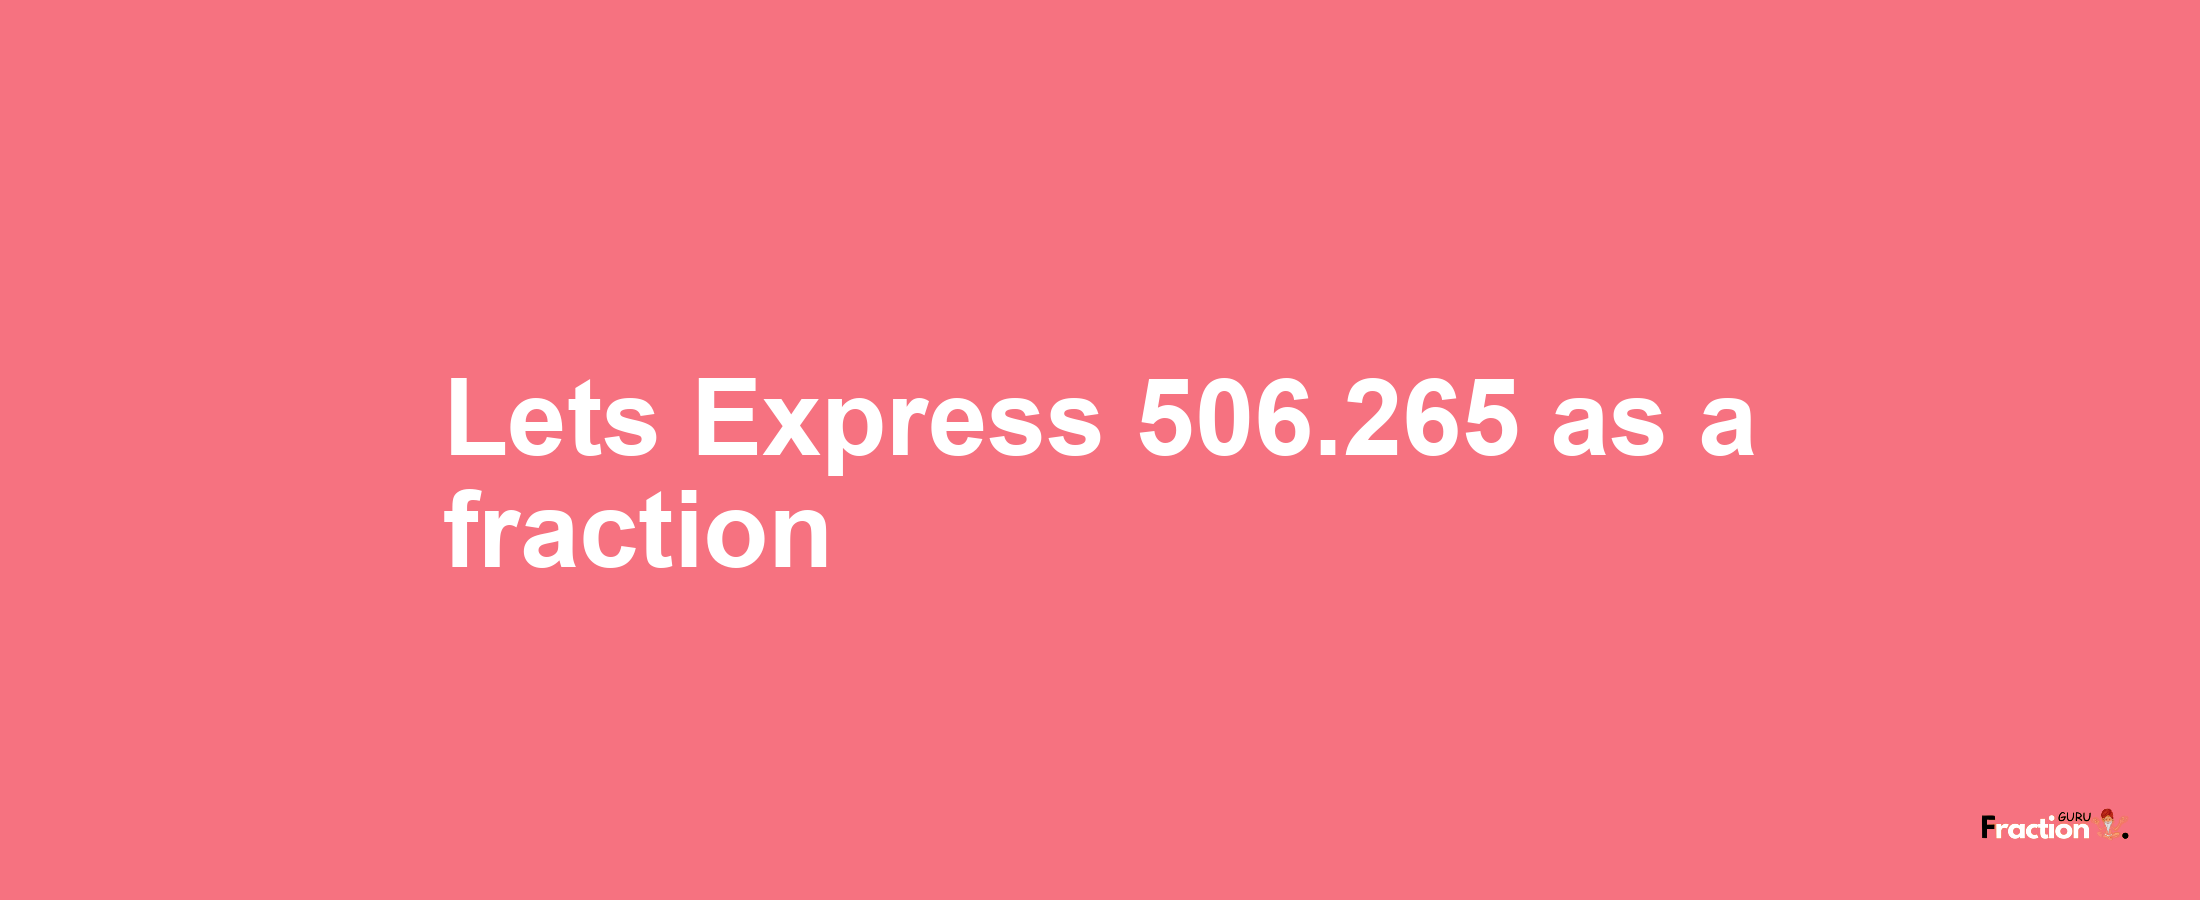 Lets Express 506.265 as afraction